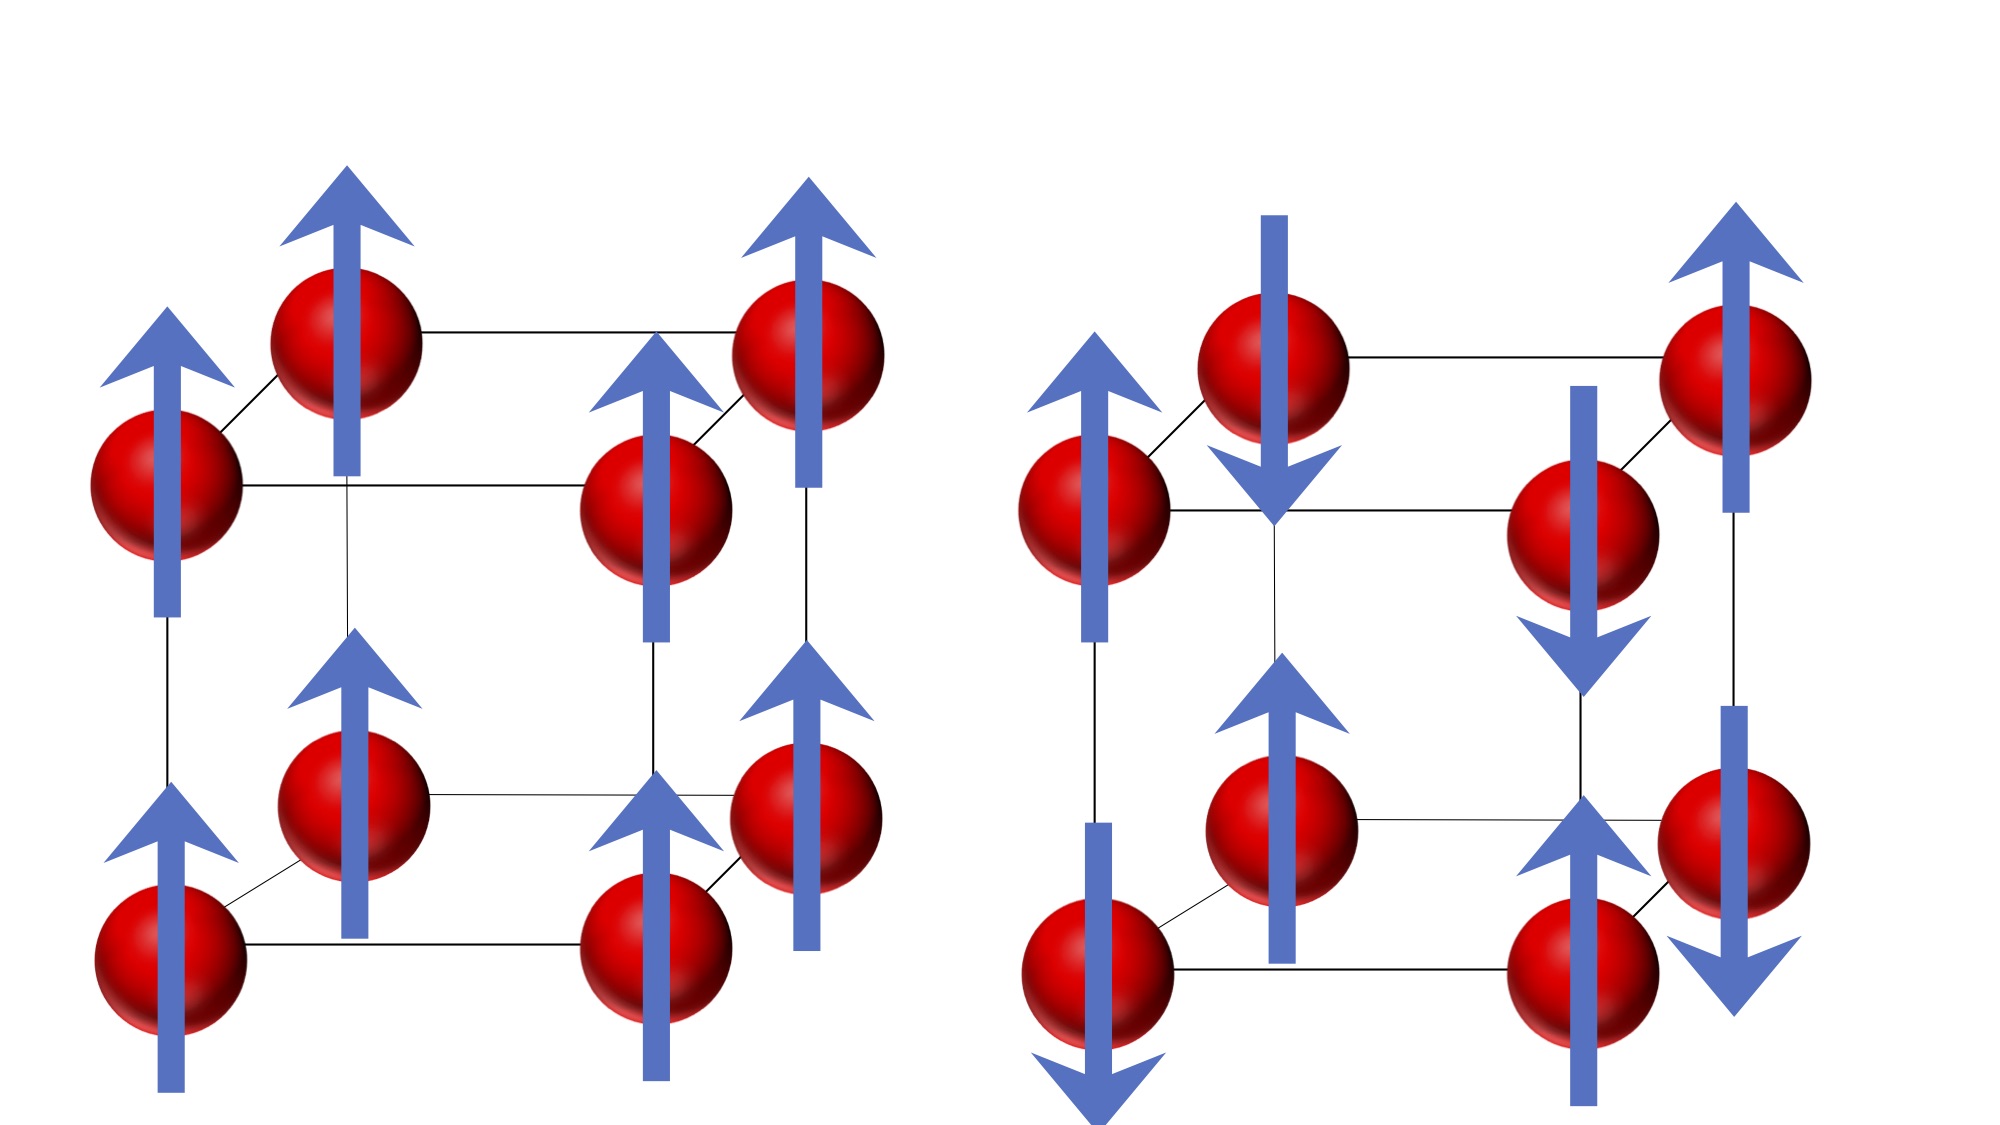 Fig. 1 In a ferromagnet (left), the magnetic moments of the atoms point in one direction.  In an antiferromagnet (right), the magnetic moments alternate. 